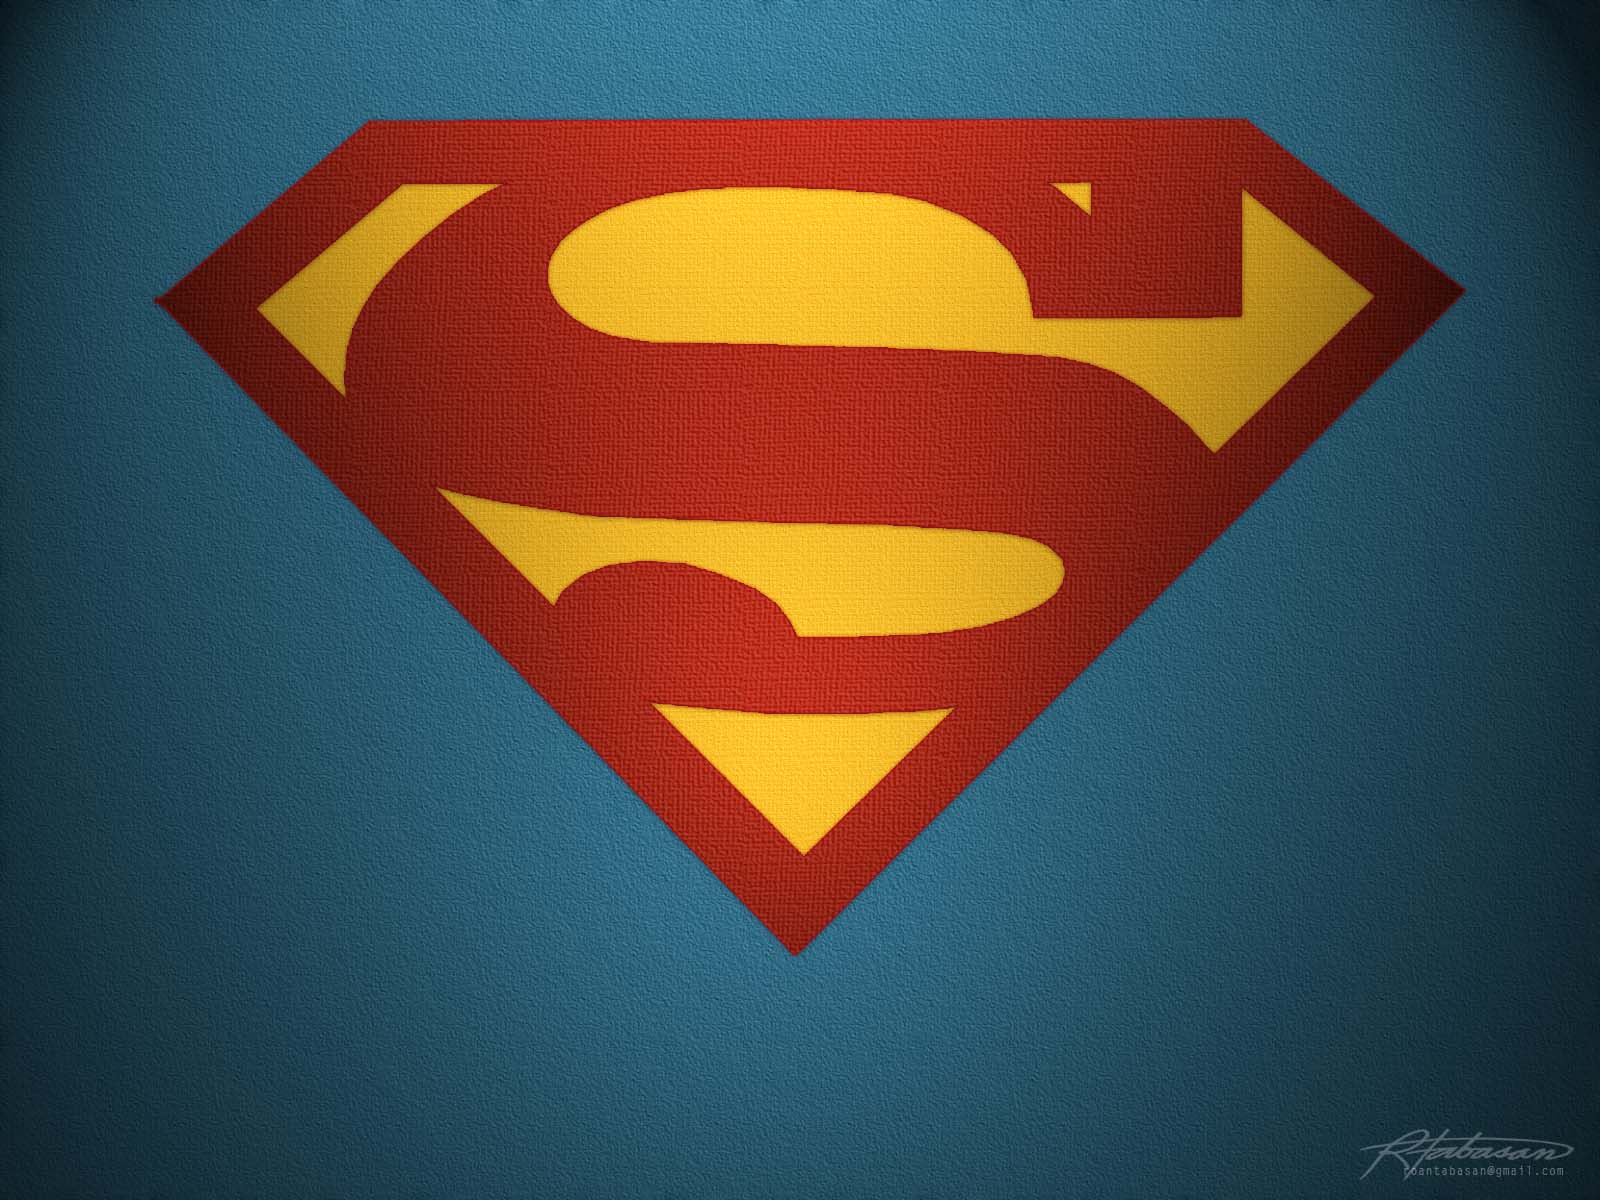 Check This Out Our New Superman Wallpaper